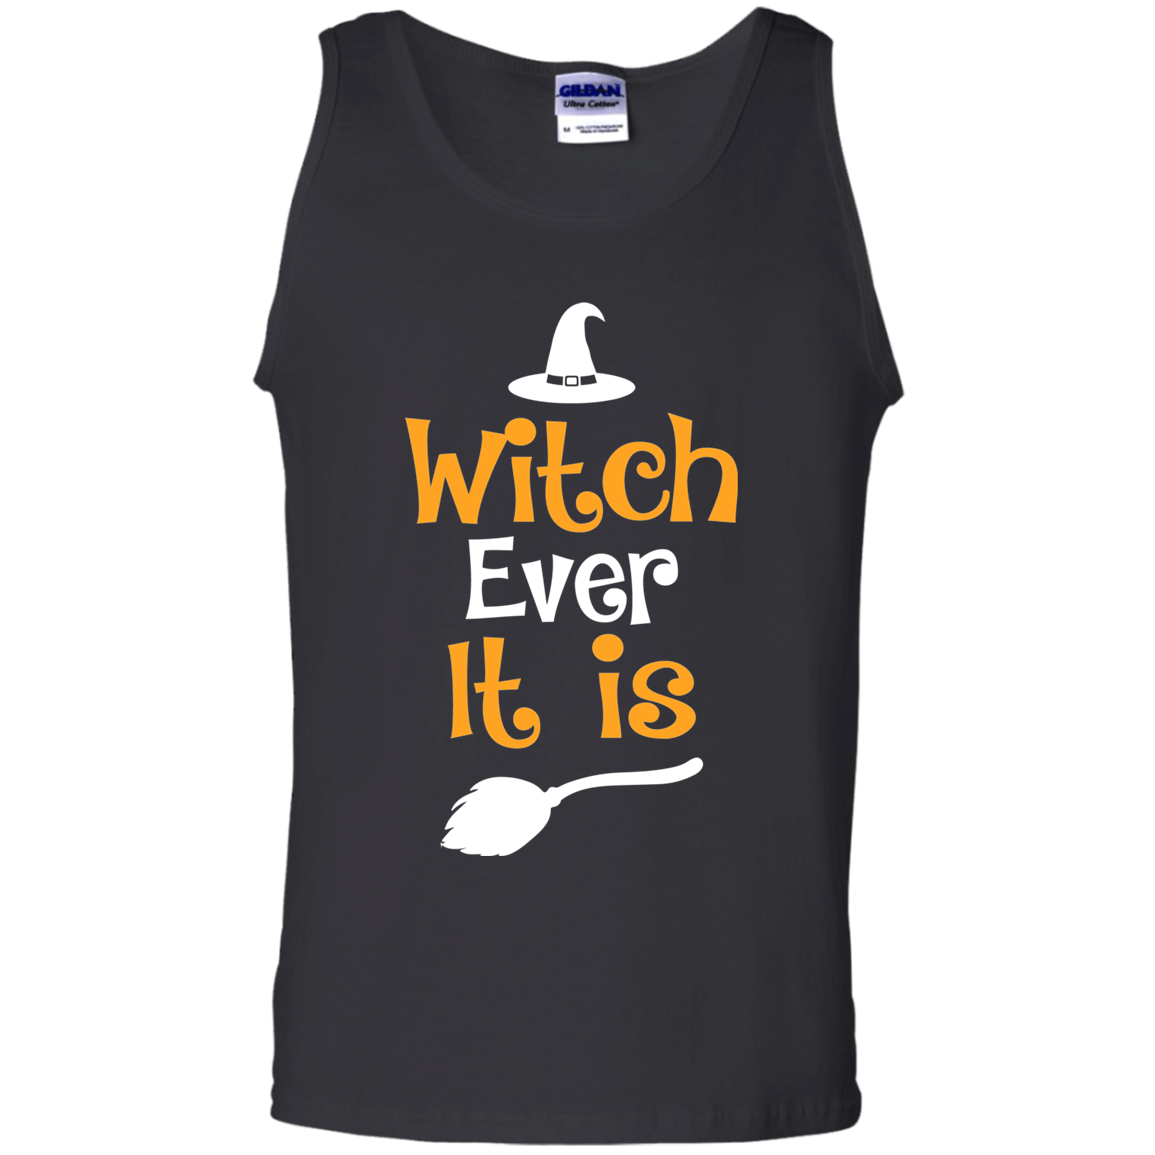 Check Out This Awesome Witch - Witch Ever It Is Halloween T-shirt Tank Top